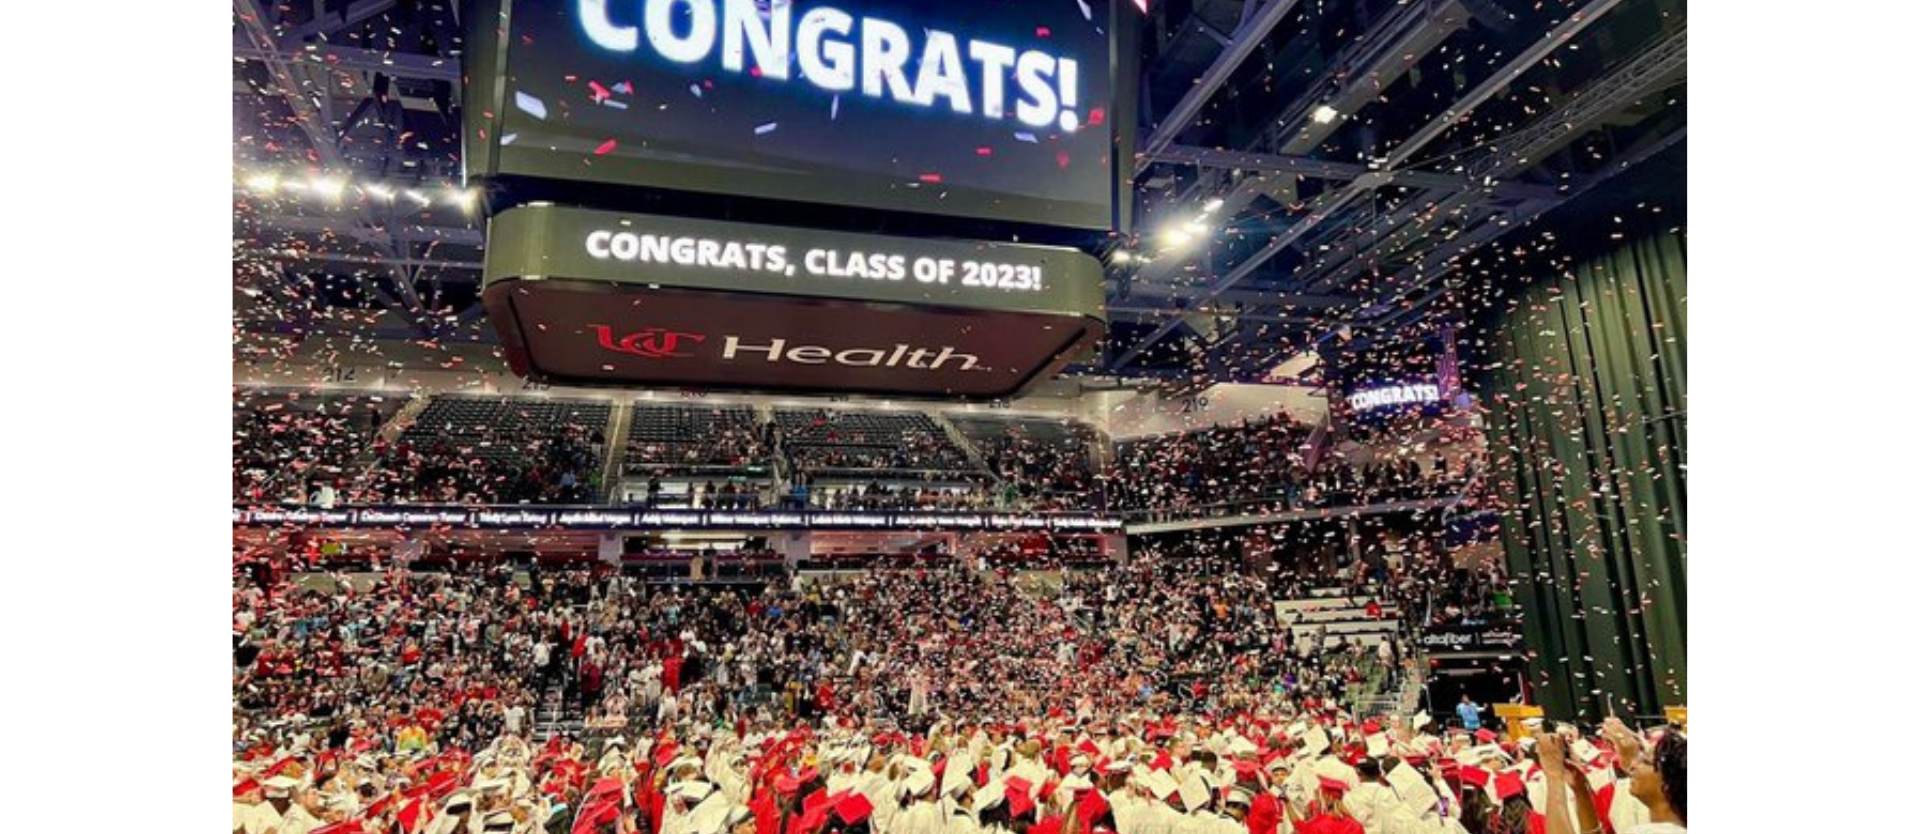 Congrats sign at graduation with students under and confetti